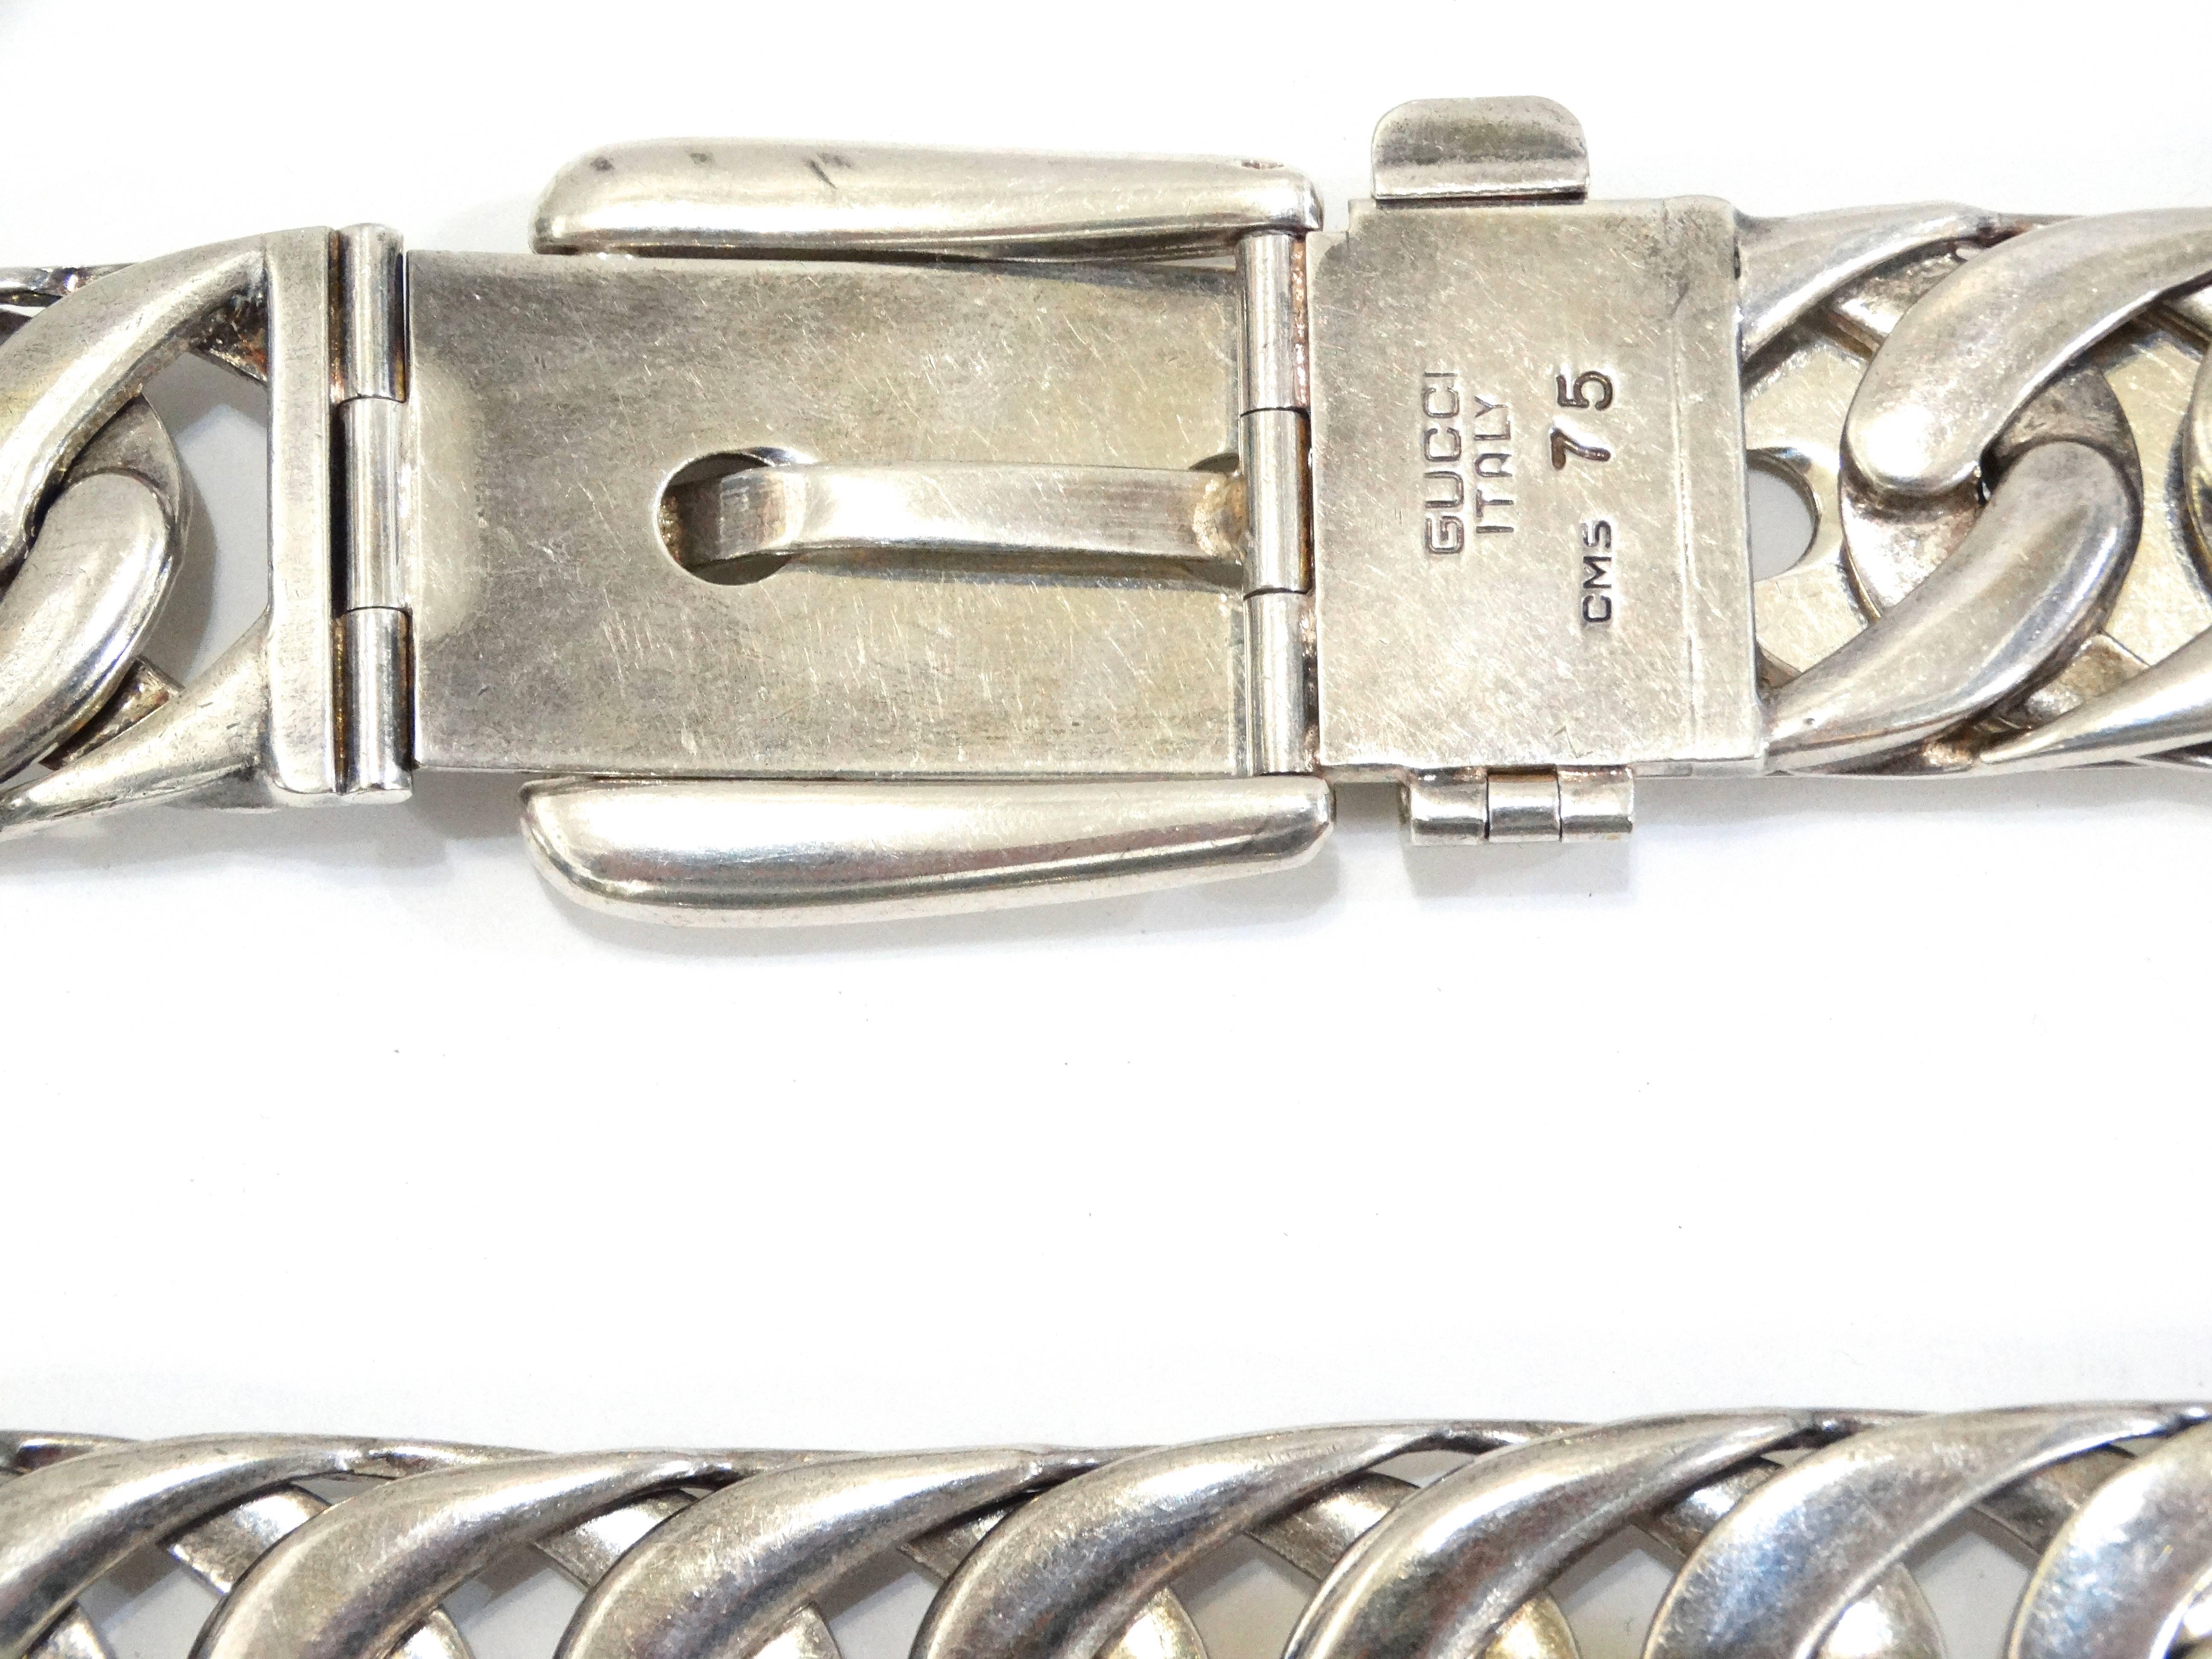 Rare 1970's Gucci chain belt cast in sterling silver- this piece has some weight to it! Traditional belt buckle style with thick flat chain strap. Signed Gucci Italy 75 CMS

The belt chain measures 36 1/2